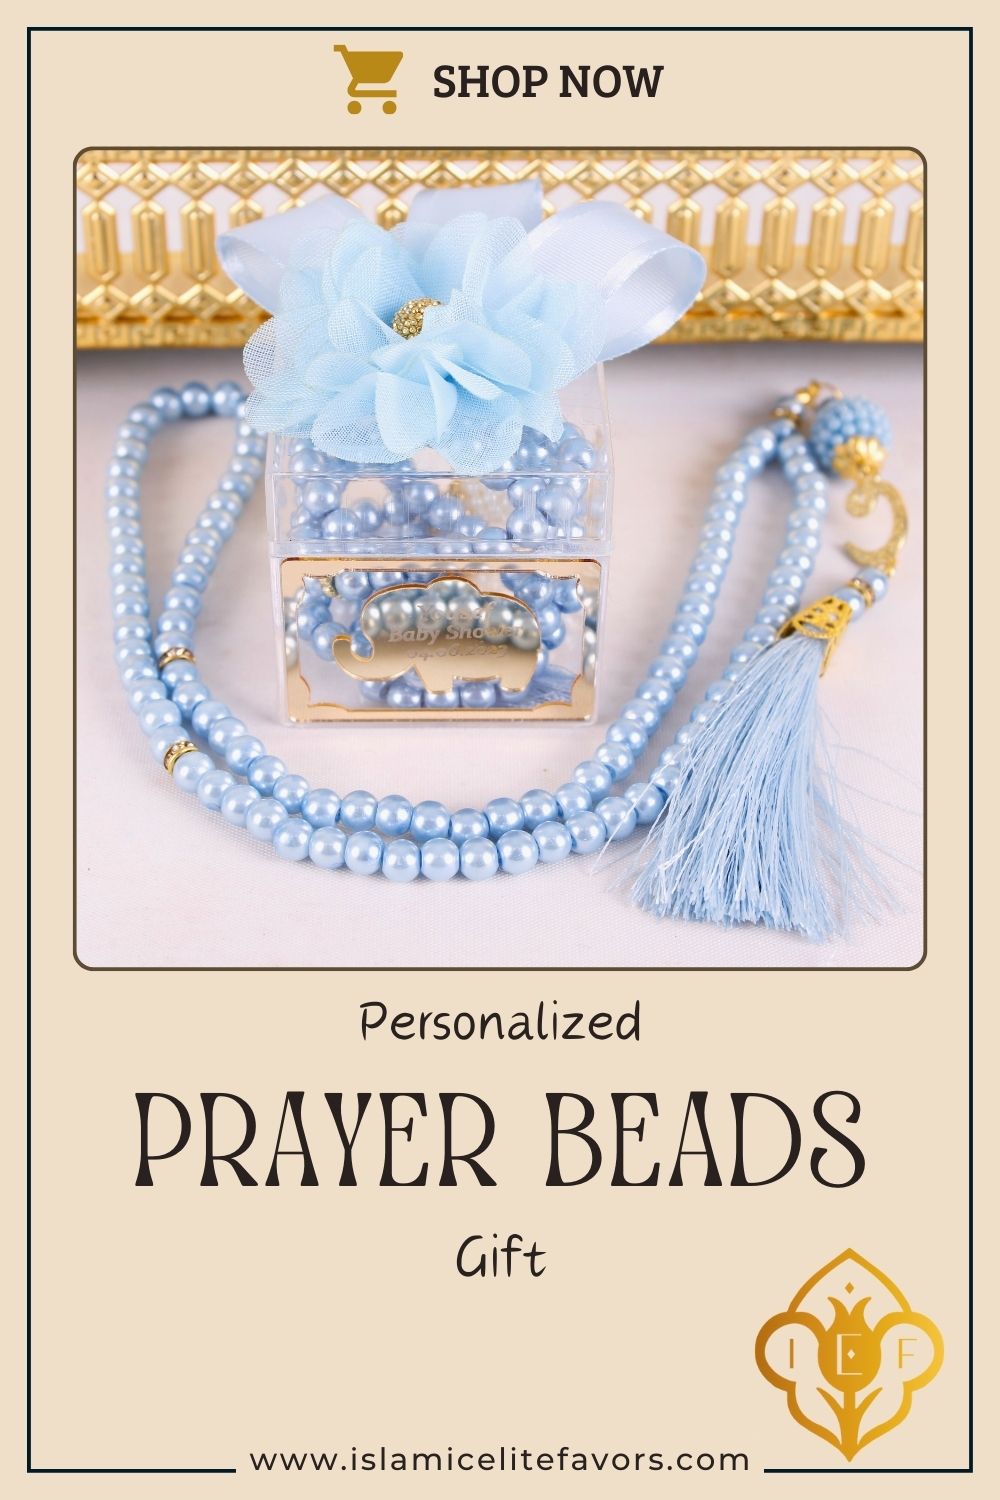 Personalized Prayer Beads Baby Shower Favor for Boy in Mica Gift Box - Islamic Elite Favors is a handmade gift shop offering a wide variety of unique and personalized gifts for all occasions. Whether you're looking for the perfect Ramadan, Eid, Hajj, wedding gift or something special for a birthday, baby shower or anniversary, we have something for everyone. High quality, made with love.